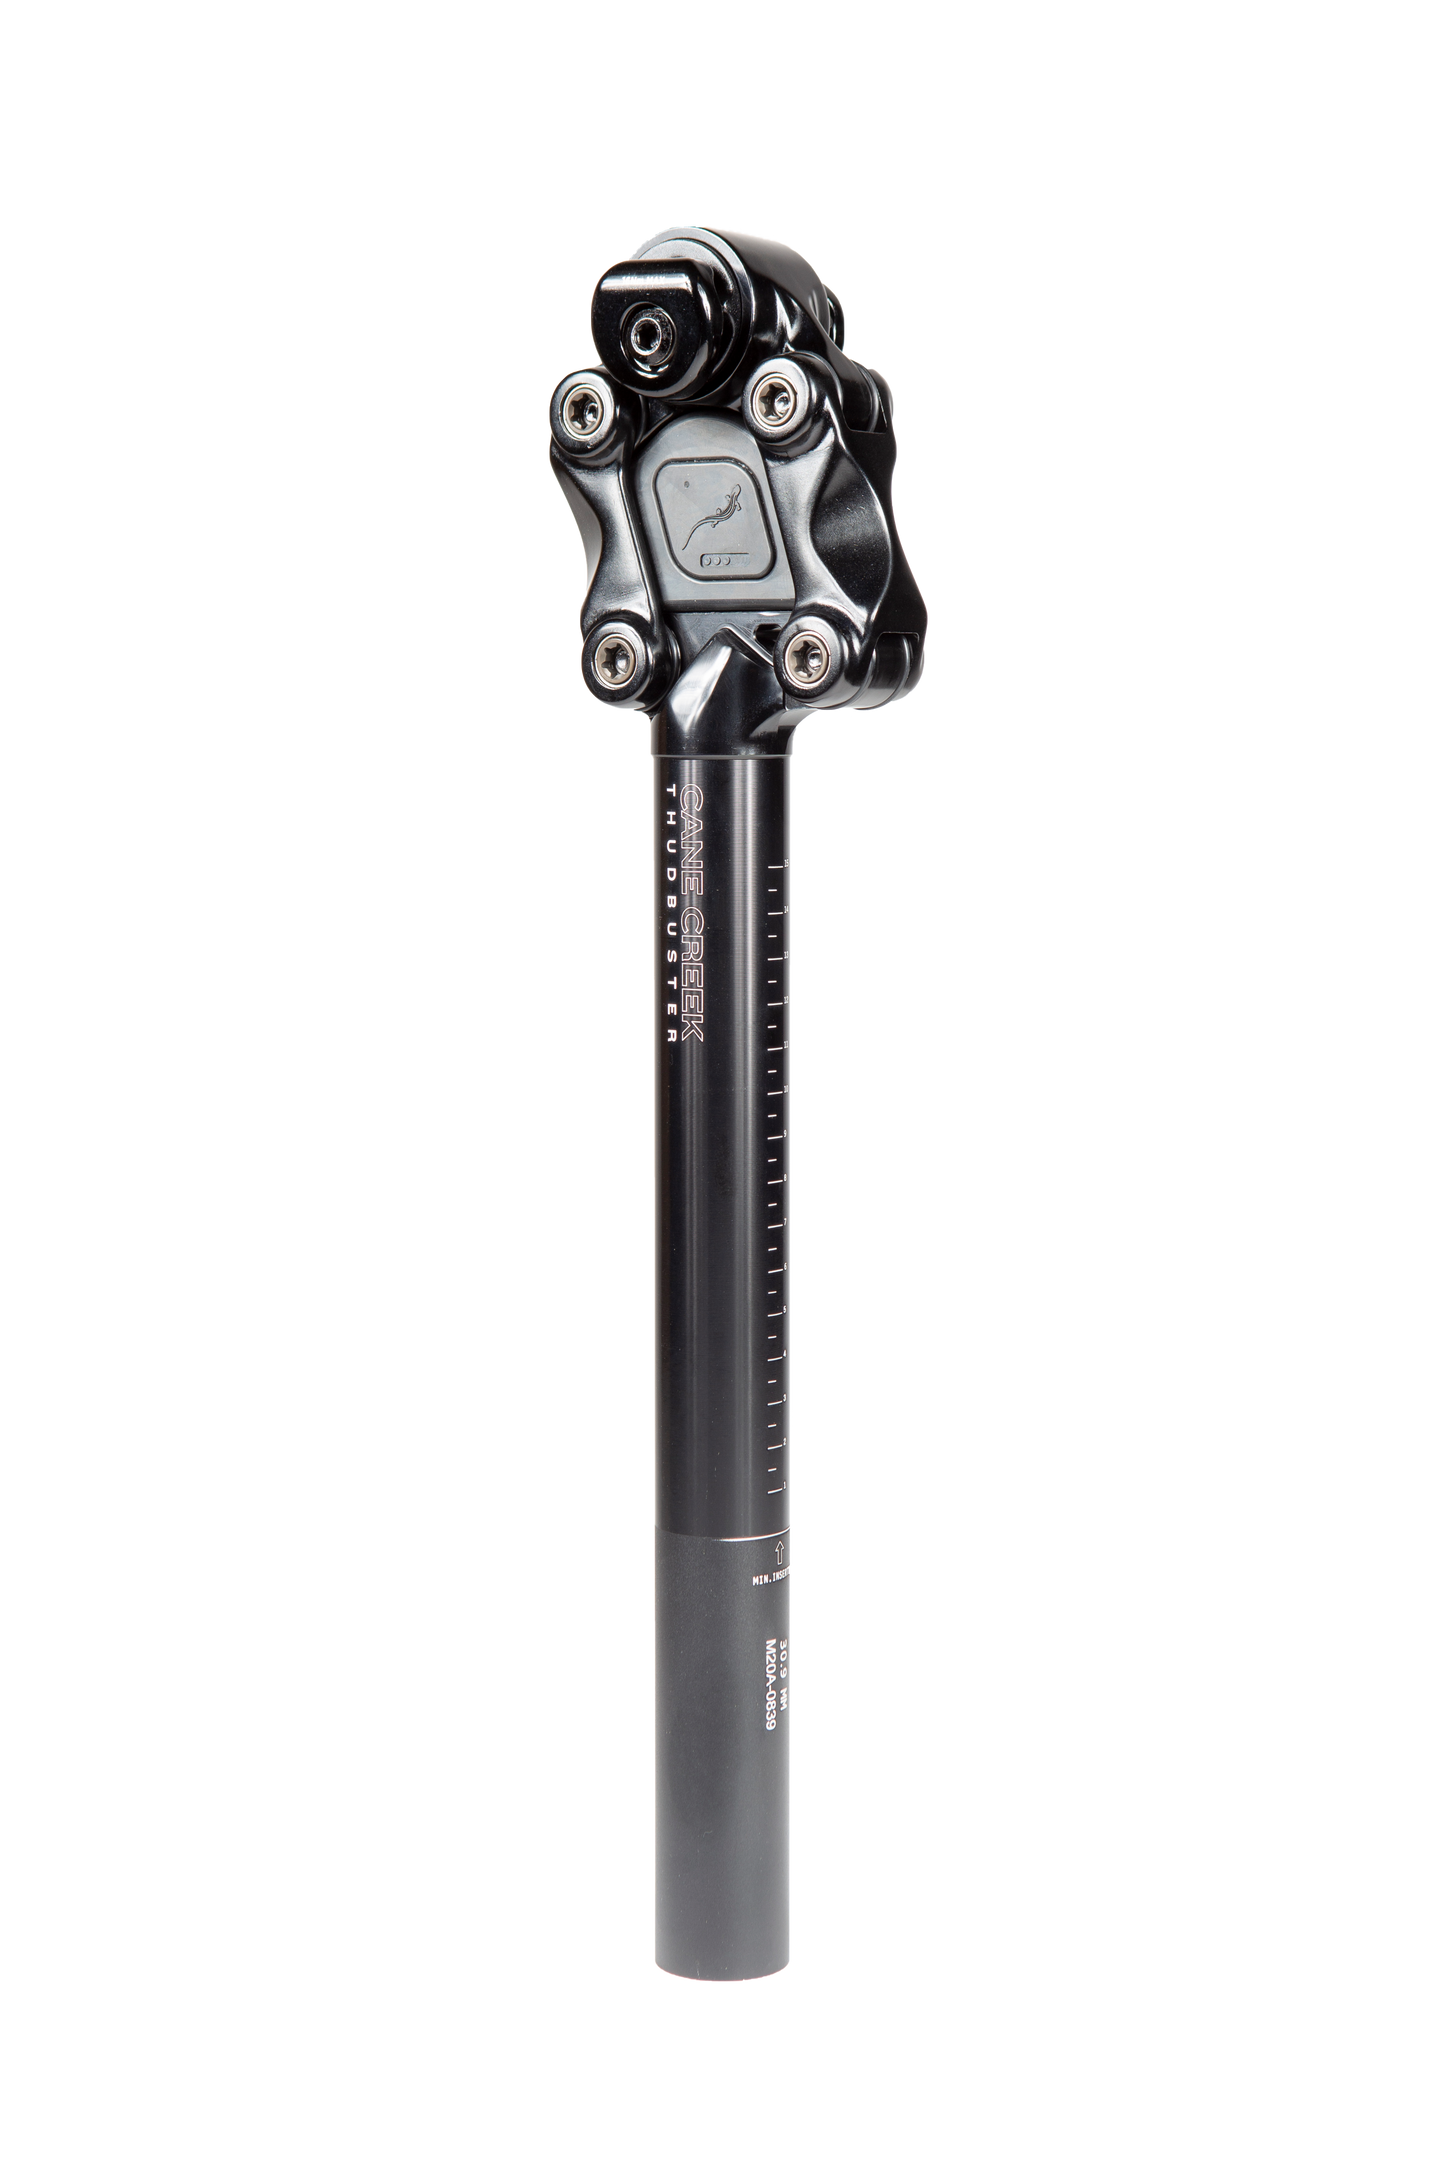 Cane Creek Thudbuster Seatpost ST